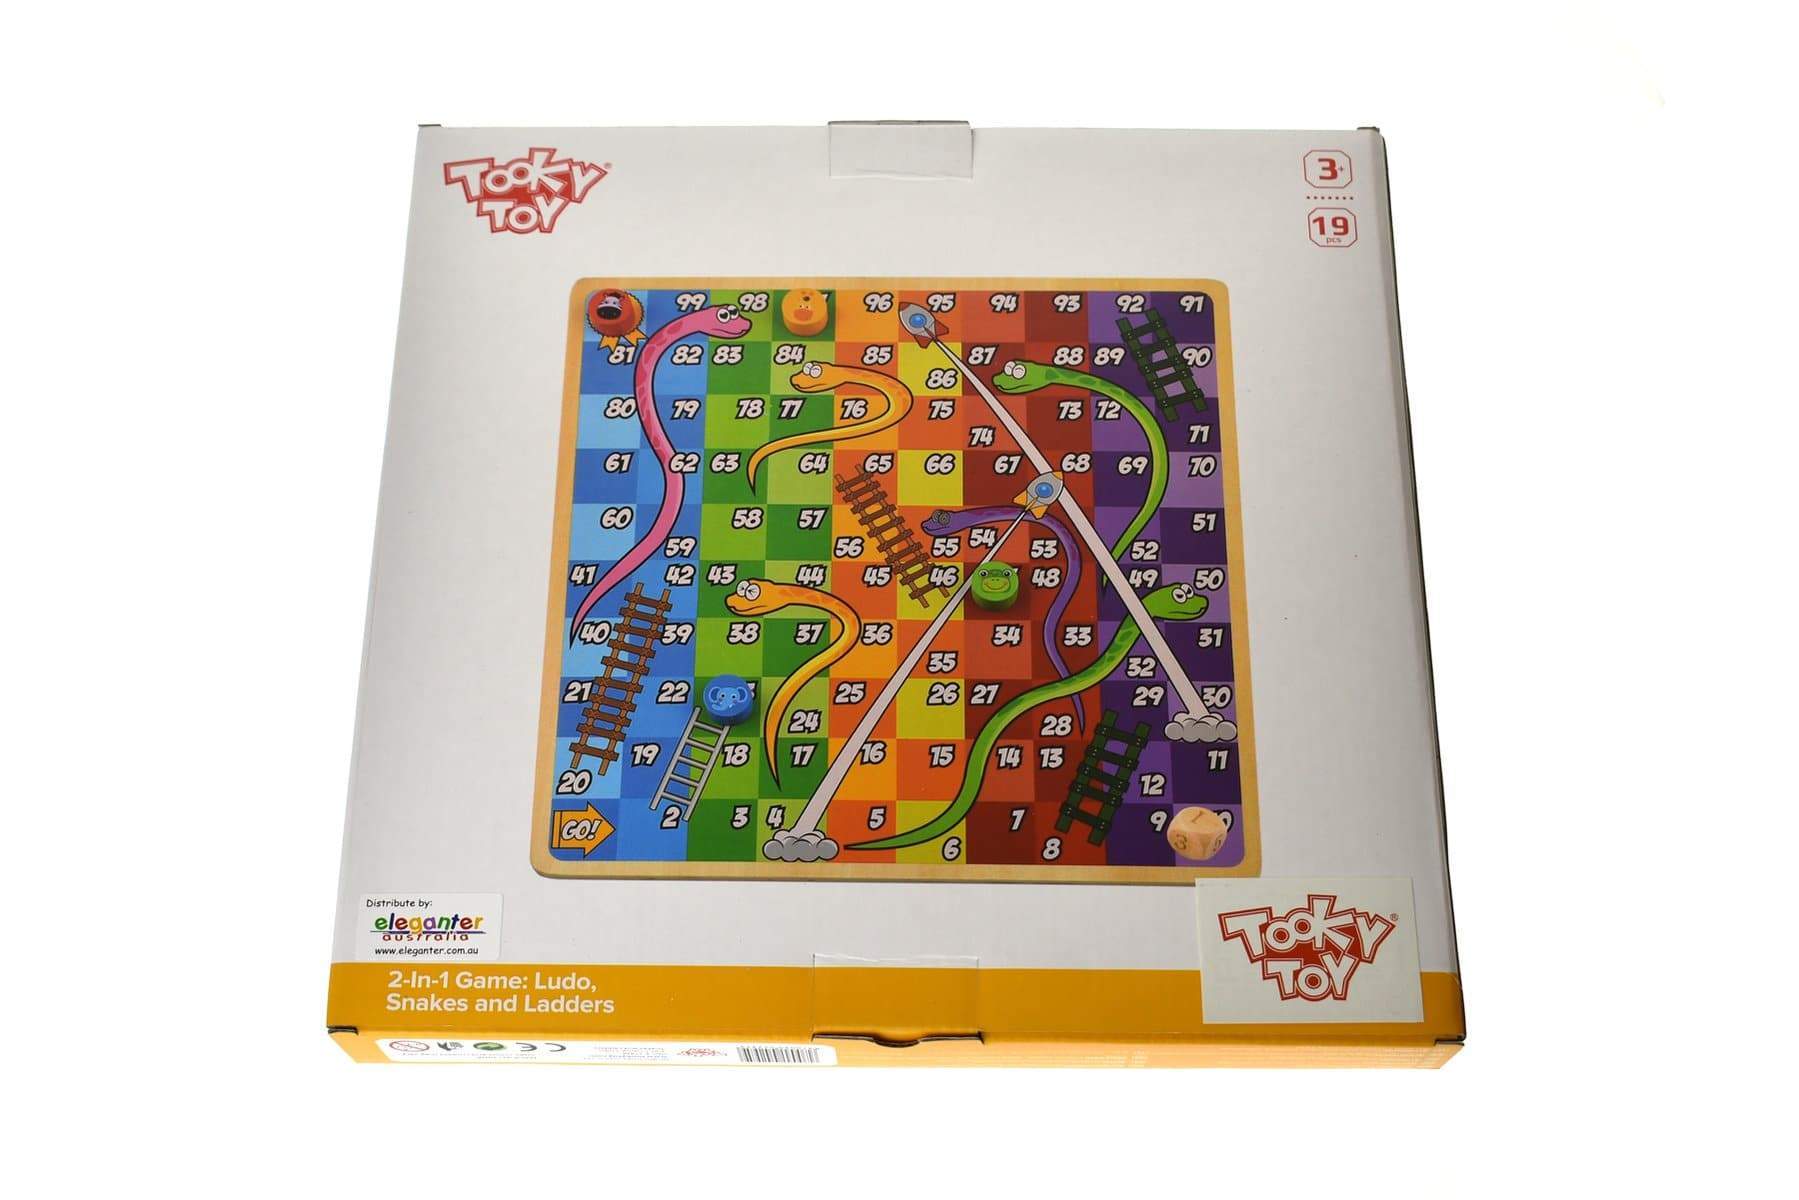 toys for infant 2 In 1 Wooden Board Game - Ludo Game, Snakes And Ladders